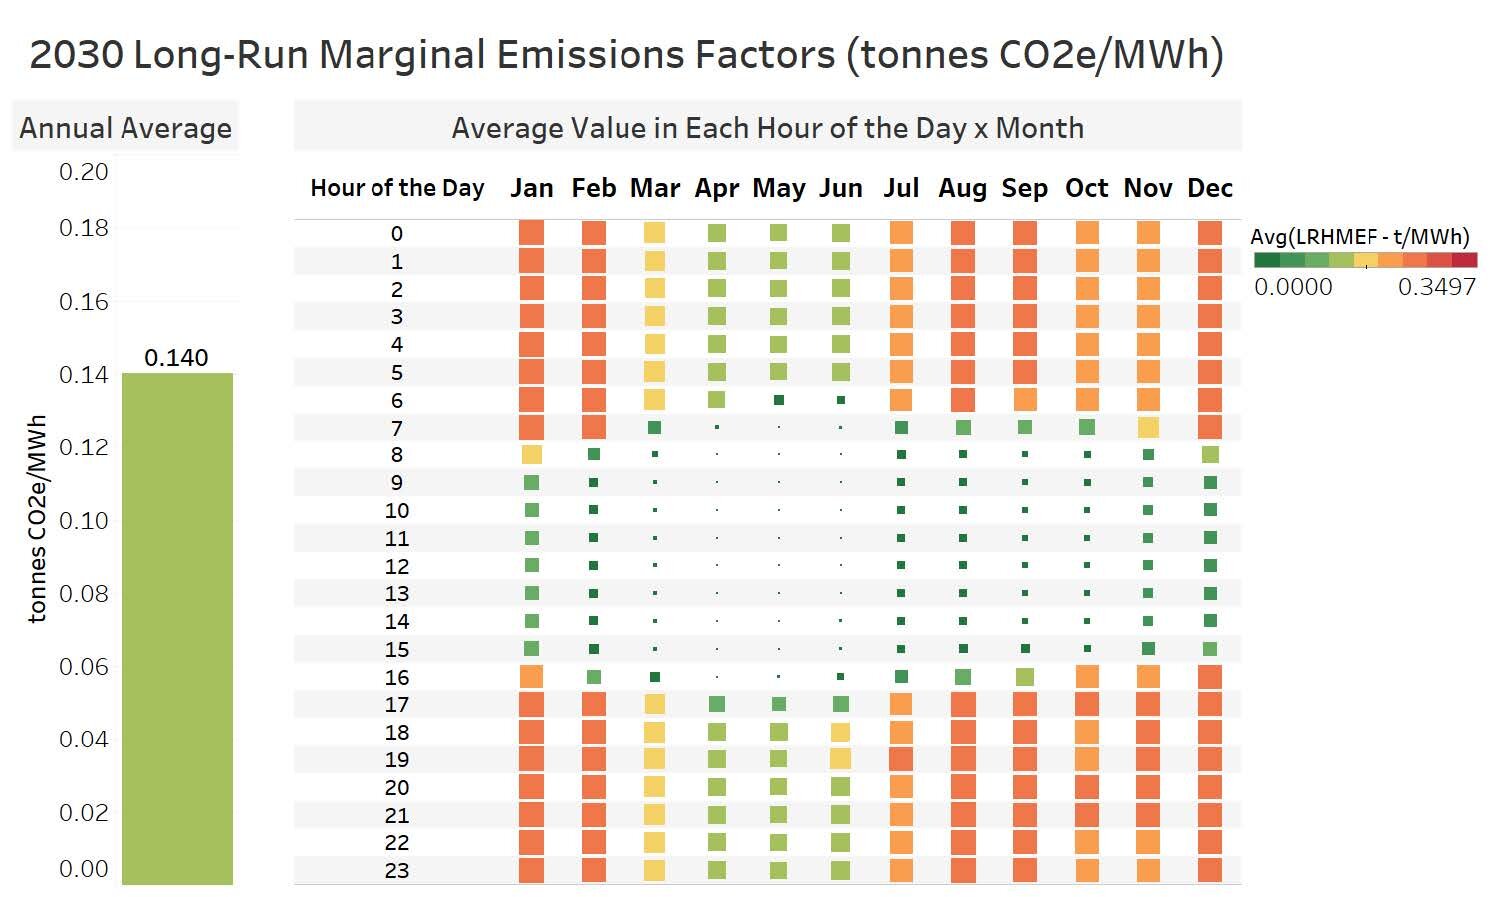  Heat map of emissions factors used for 2030, summarized by the average value in each hour of the day of each month; unweighted annual average shown for reference. 